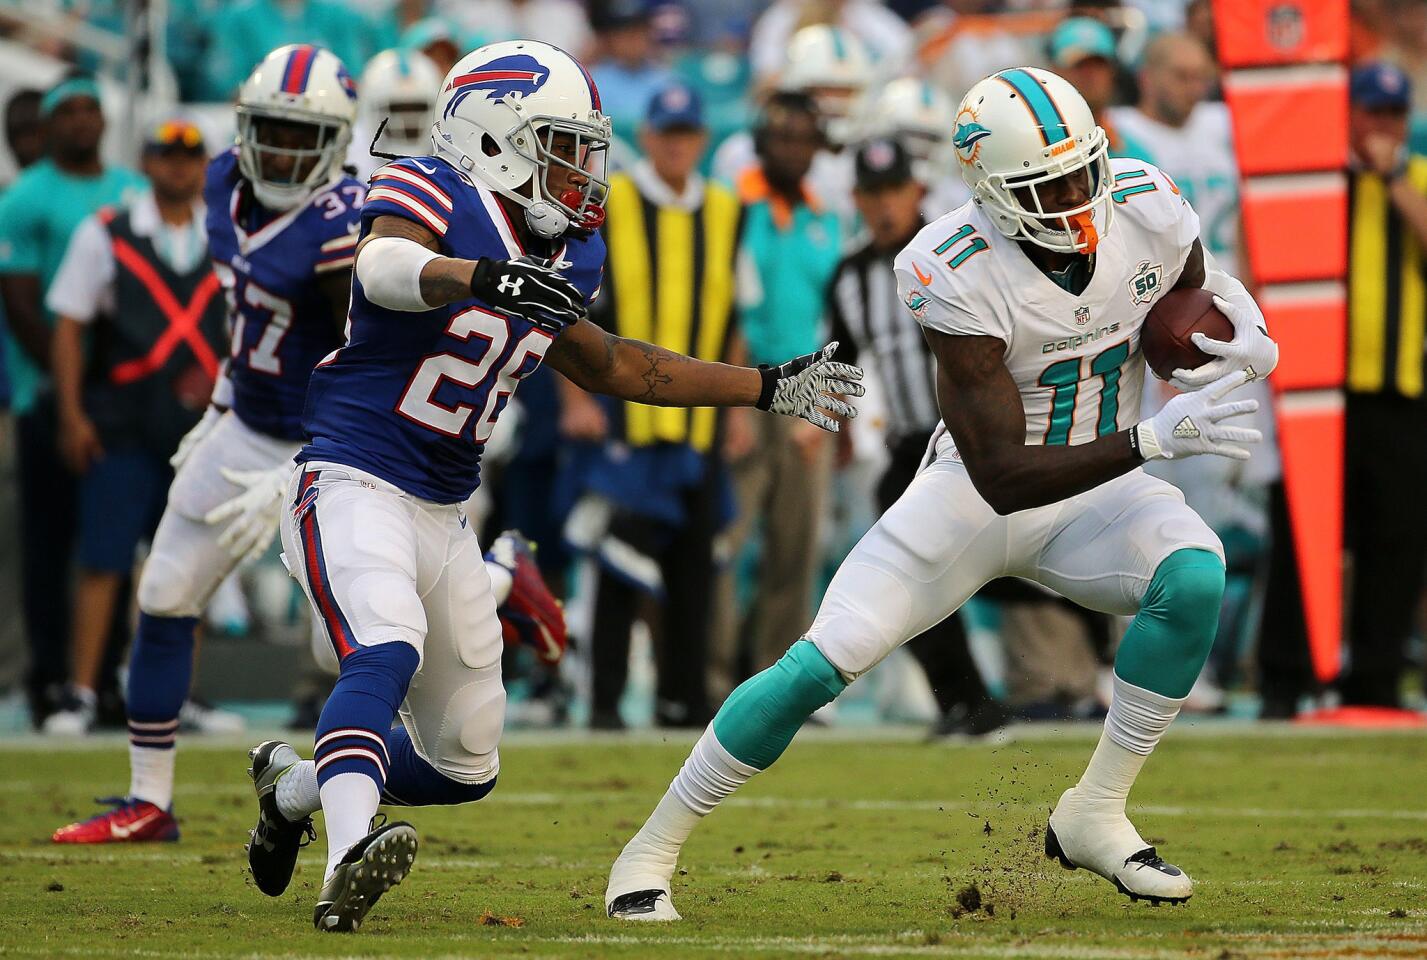 The Dolphins’ 2015 first-round pick caught three passes for 46 yards against Buffalo. Considering Greg Jennings, the Dolphins’ veteran starter, dropped two passes early in the game Sunday, the Dolphins might need to open up the competition for the starting split end spot. At this point Jennings should be considered a progress-stopper. -- OK